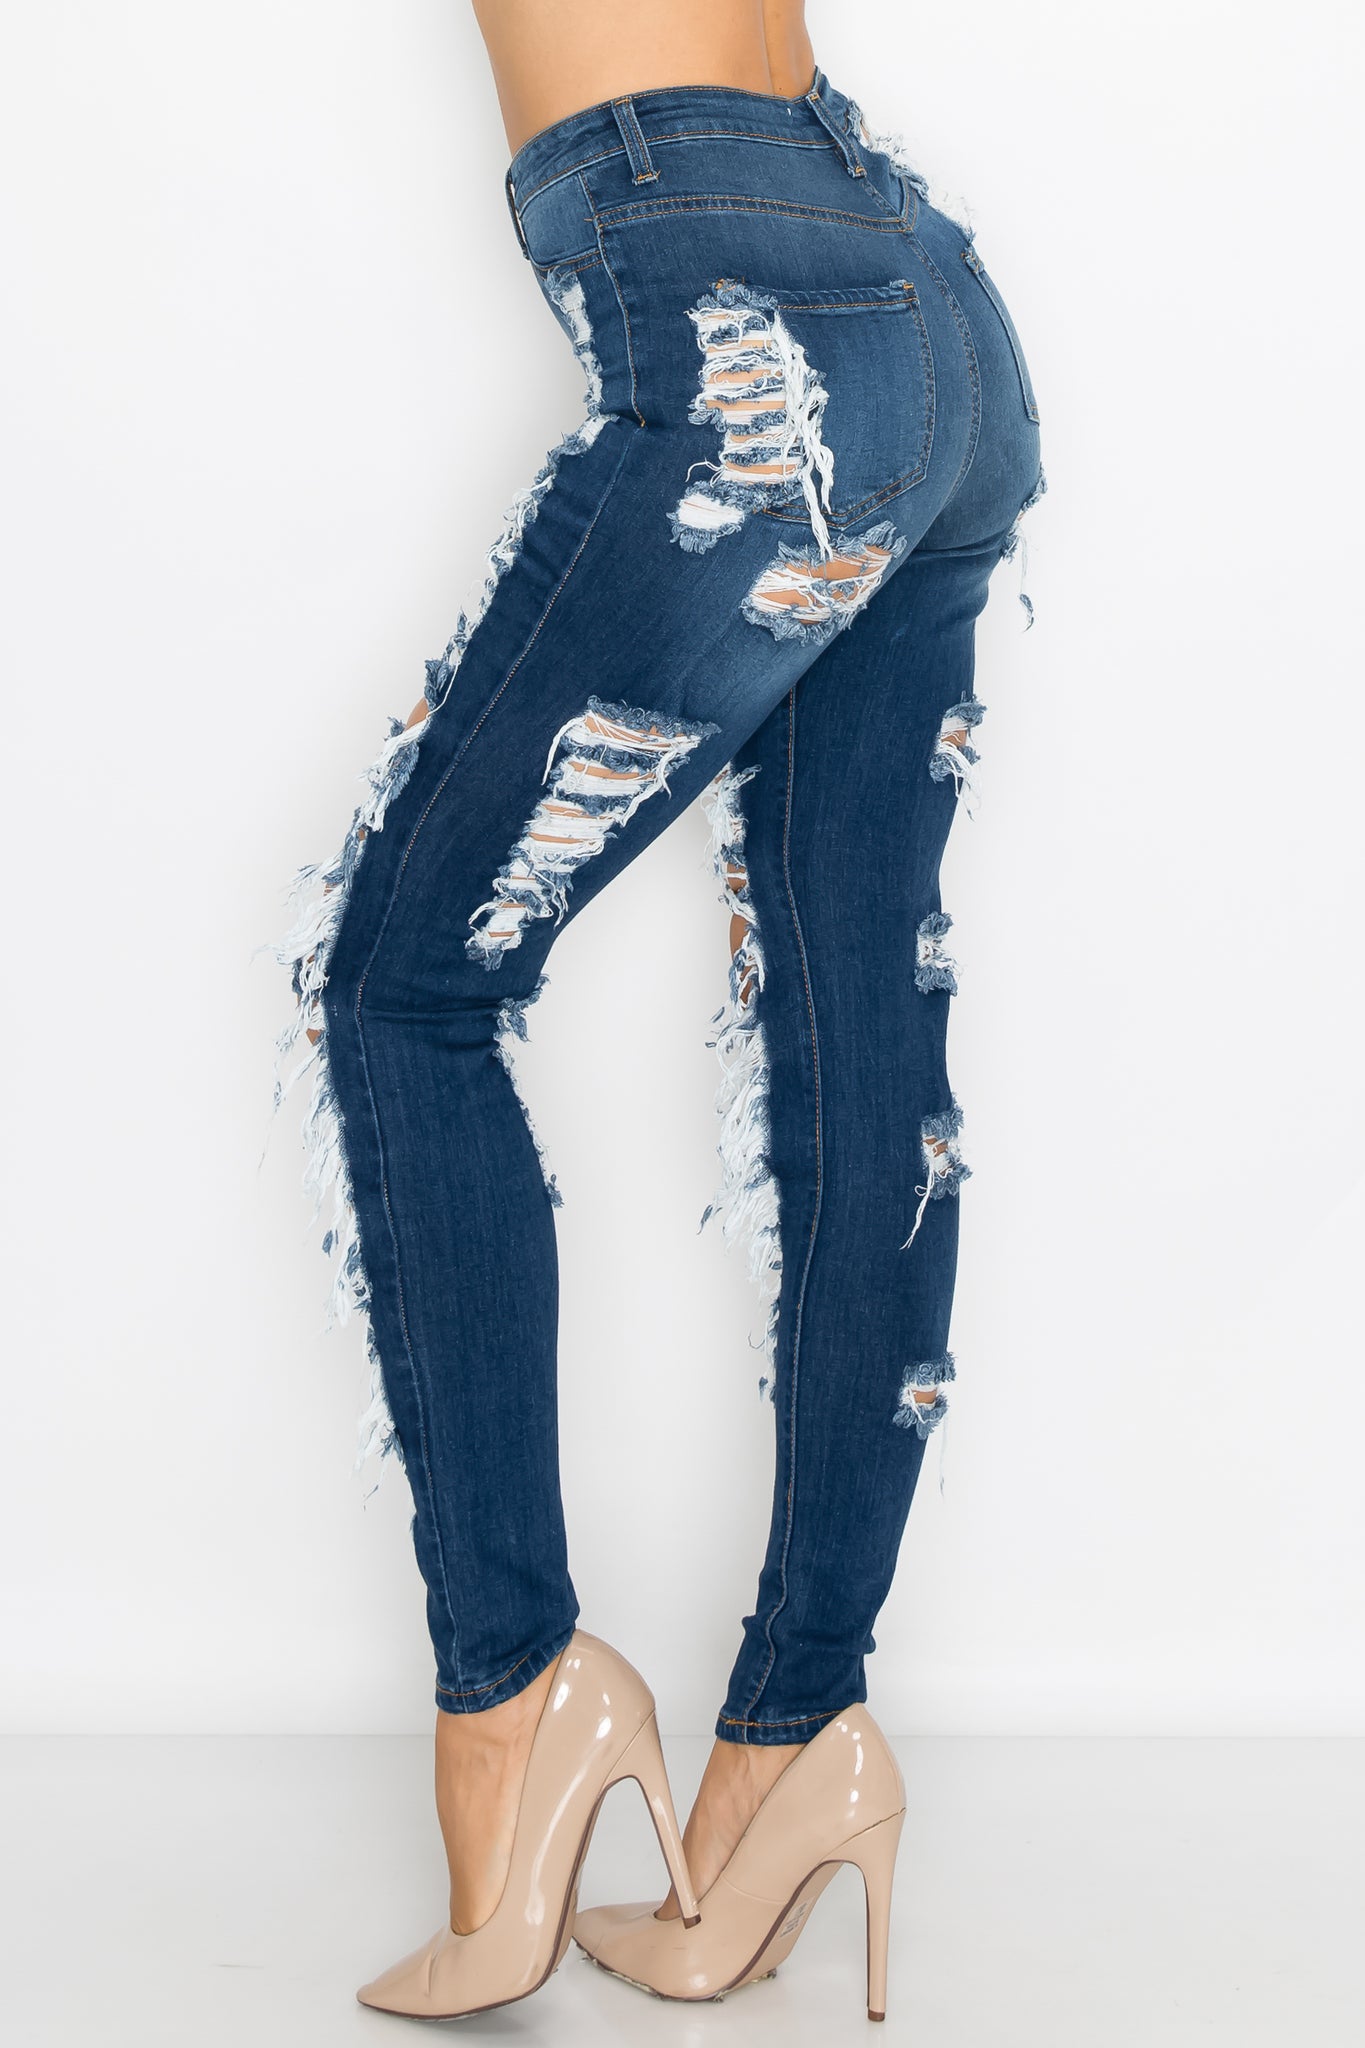 Ladies Jeans: Buy Jeans Pants for Women Online at Best Prices | GAS Jeans